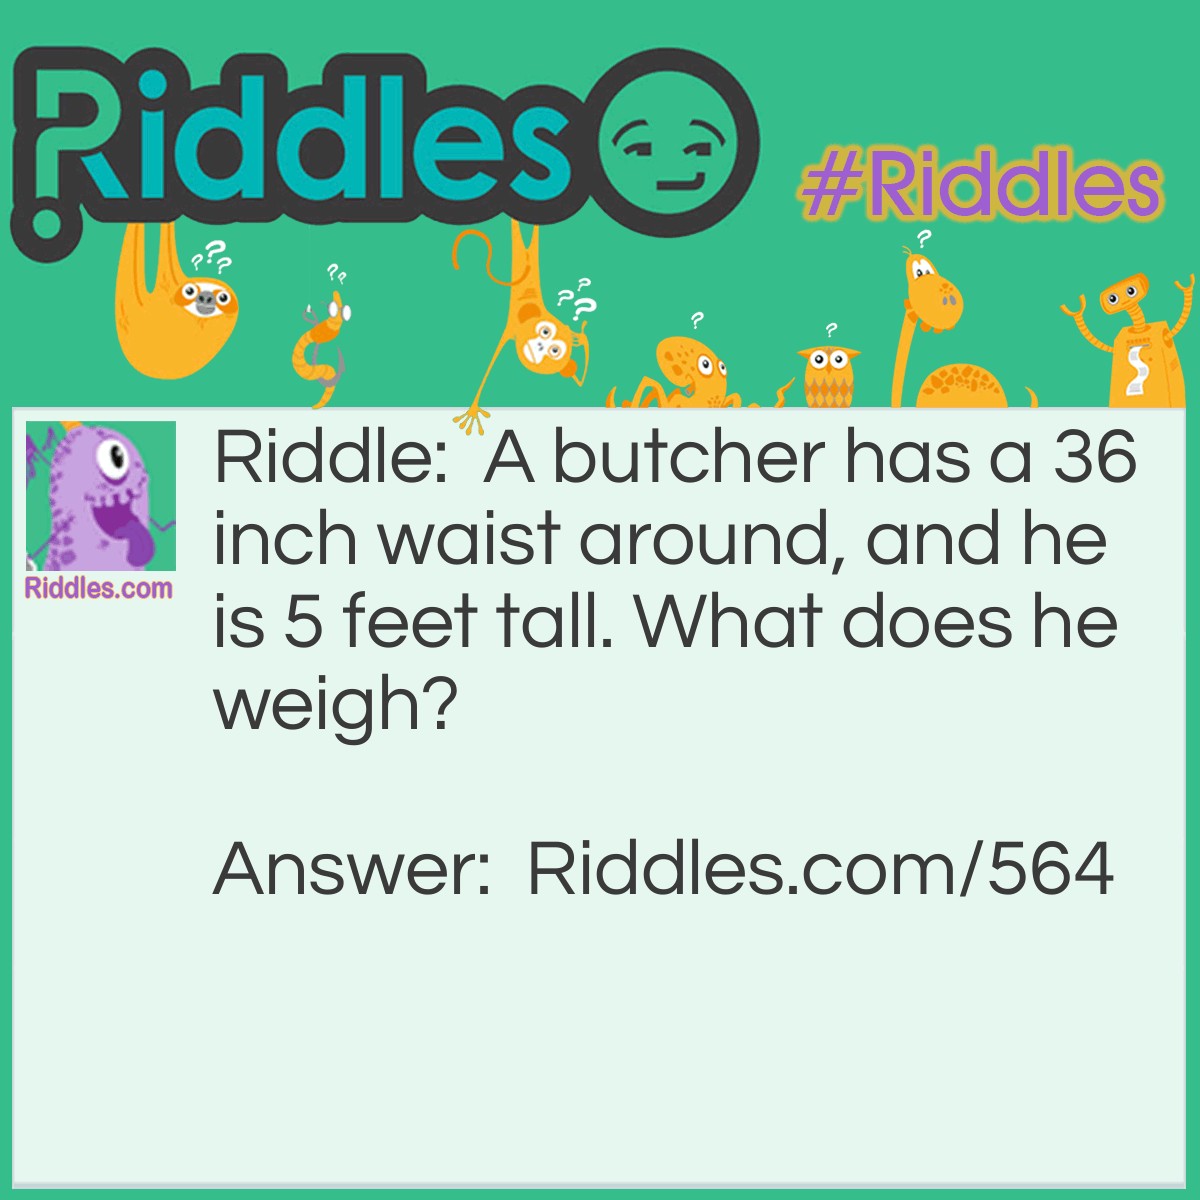 Riddle: A butcher has a 36 inch waist around, and he is 5 feet tall. What does he weigh? Answer: Meat.